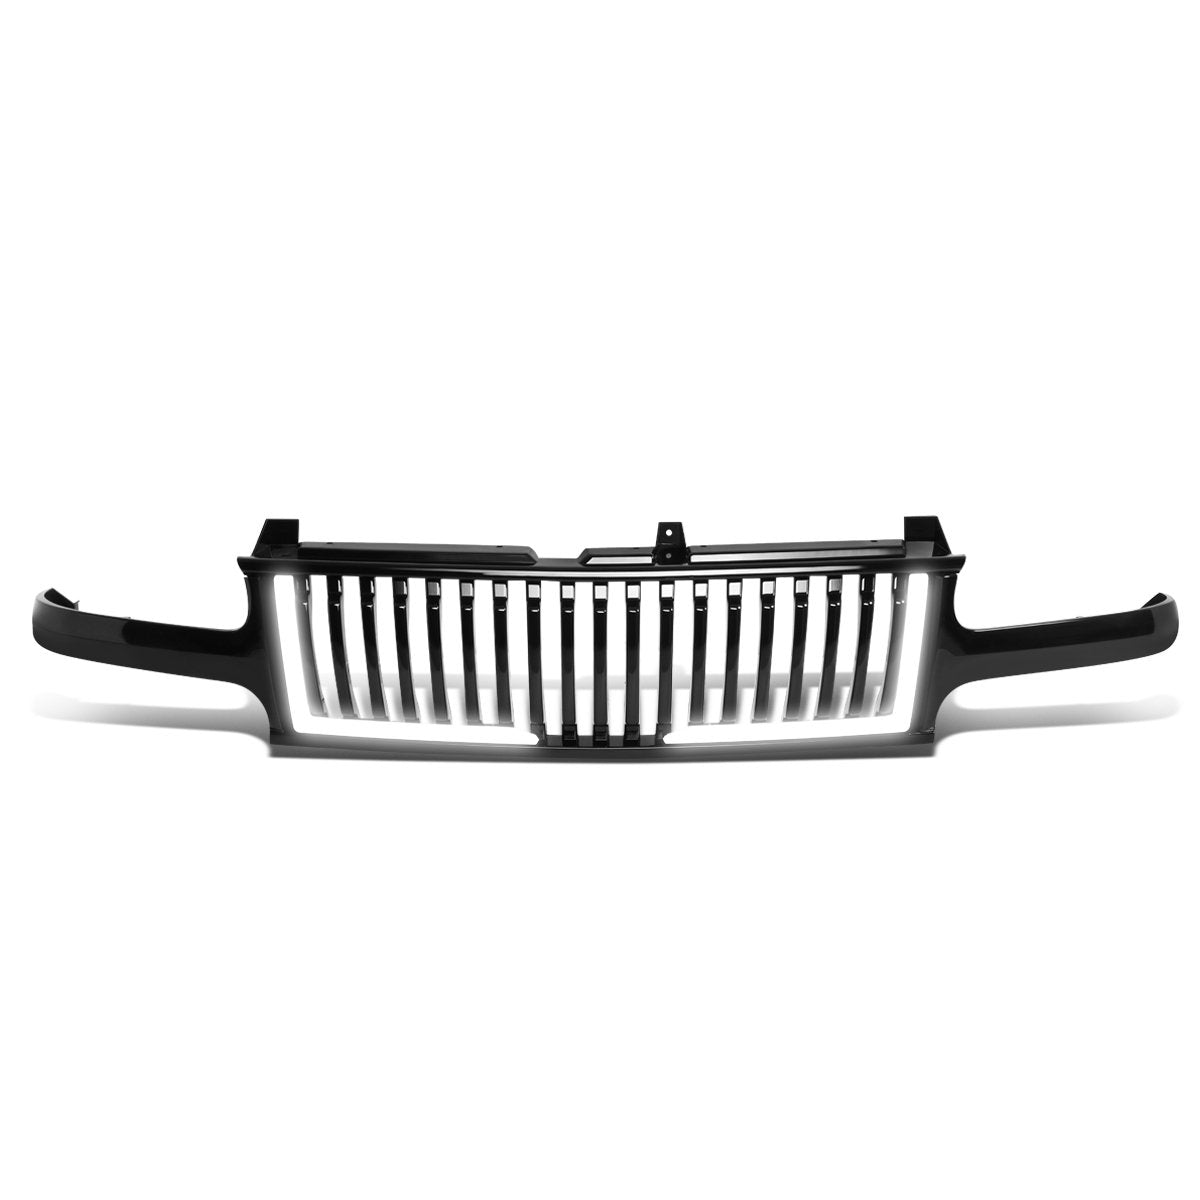 DNA Motoring Grf-lb-001-t2-bk for 1999 to 2006 Chevy Silverado Suburban Tahoe LED DRL Vertical Slat Fence Style Front Grille Grill Frame 00 01 02 03